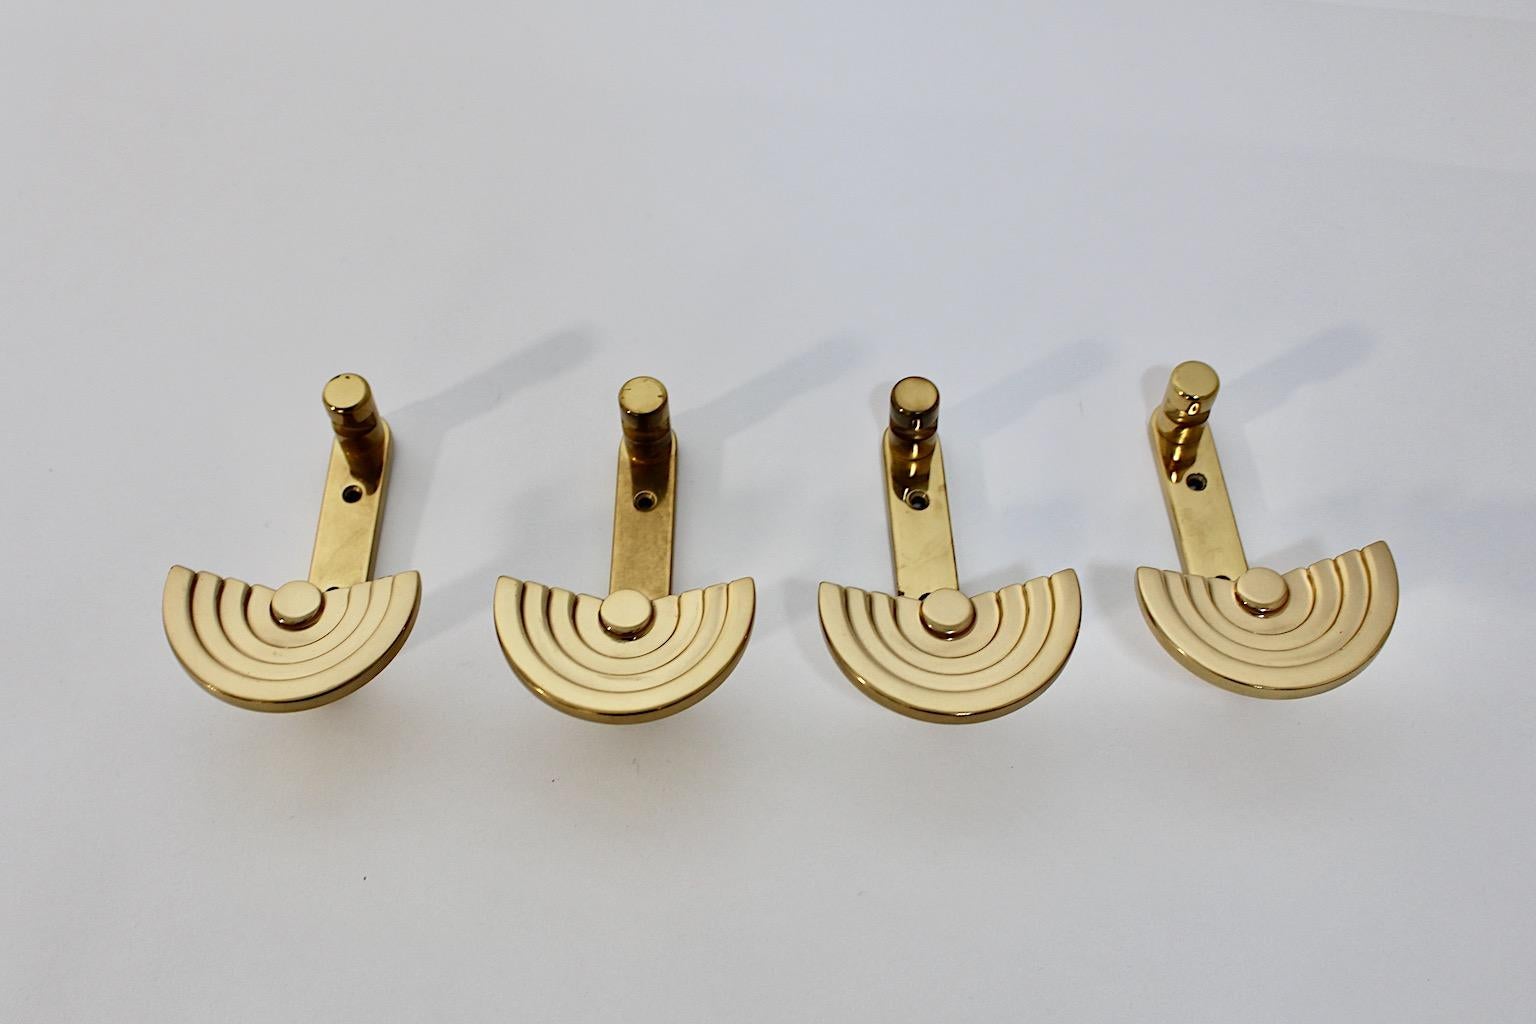 Italian Ettore Sottsass Vintage Brass Four Wall Hooks or Coat Hooks circa 1985 Italy For Sale